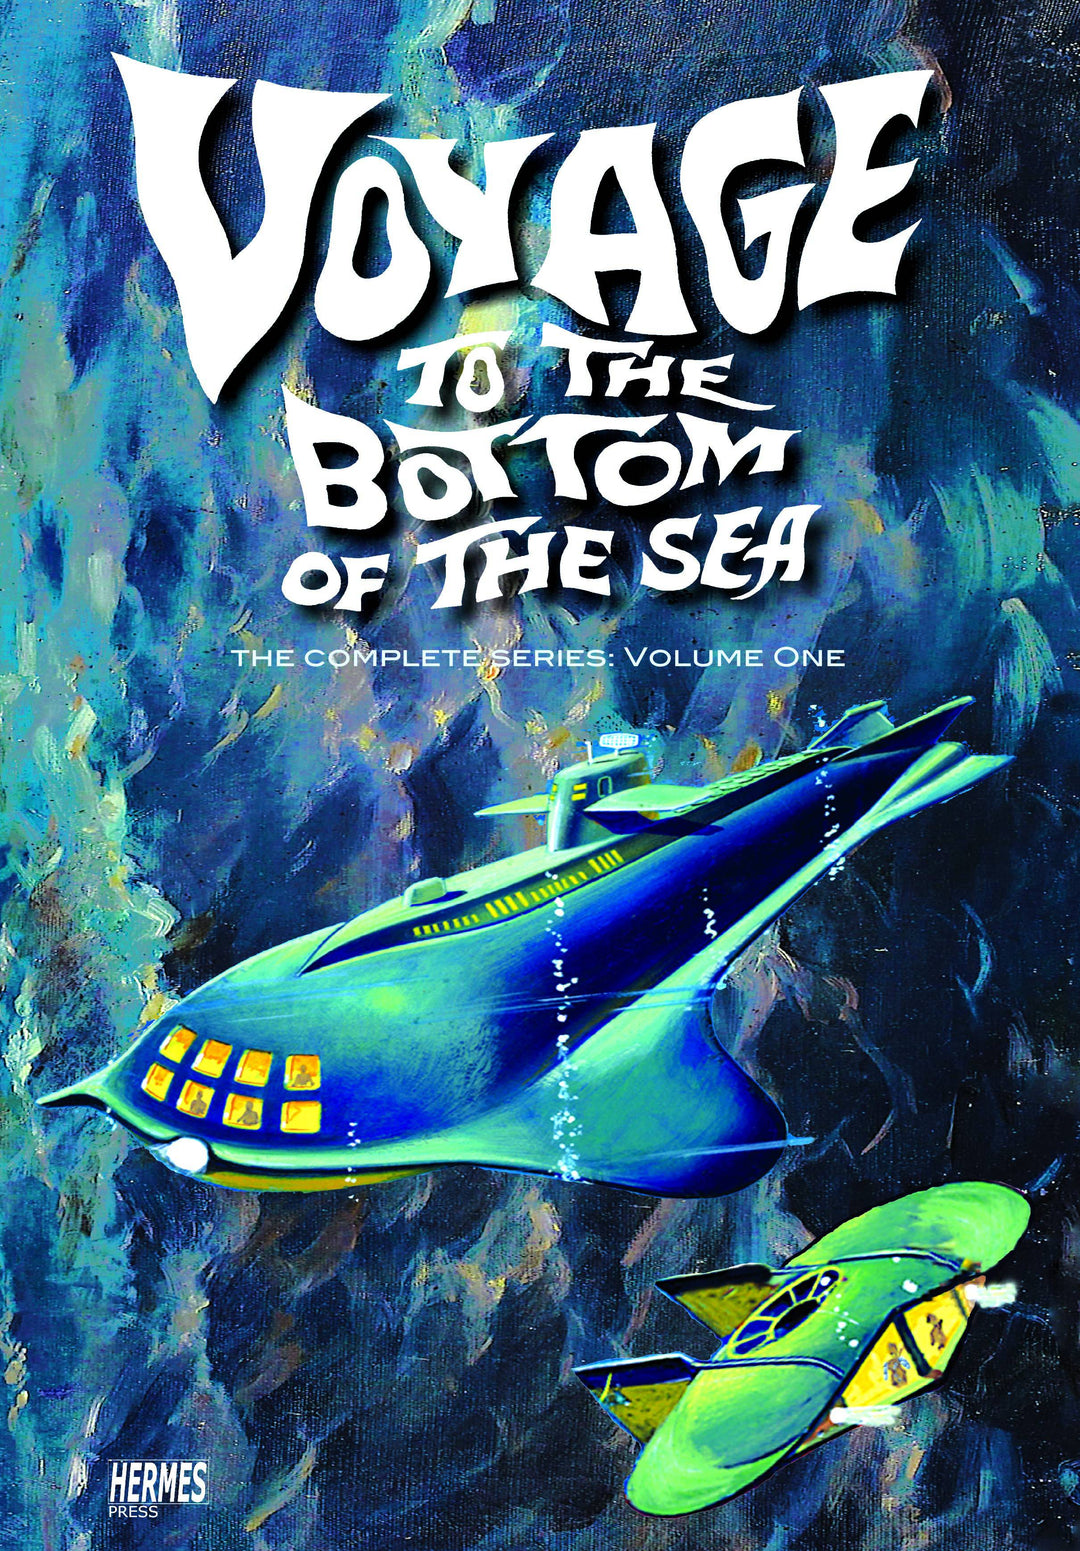 Voyage To Bottom Of The Sea Comp Series Hardcover Volume 01 OXP-03